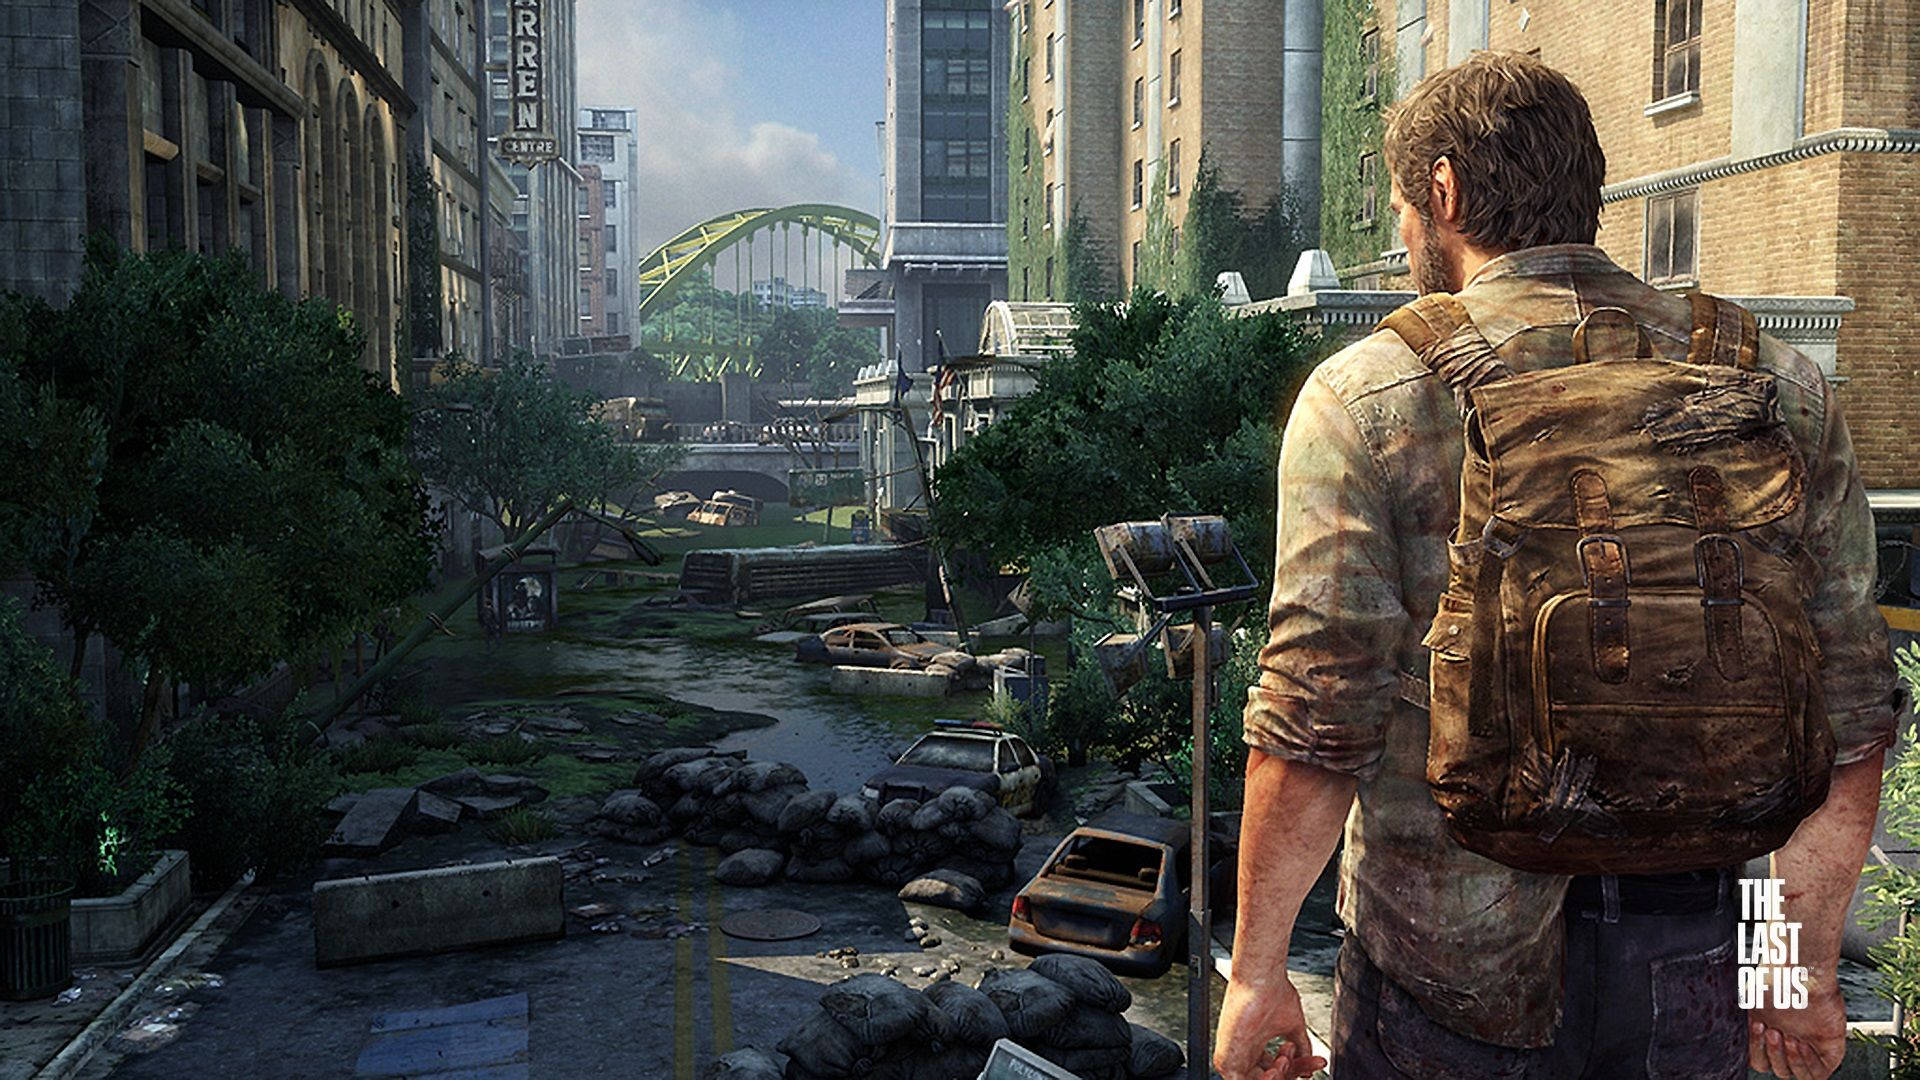 Survive the New World with Joel, in The Last of Us Wallpaper